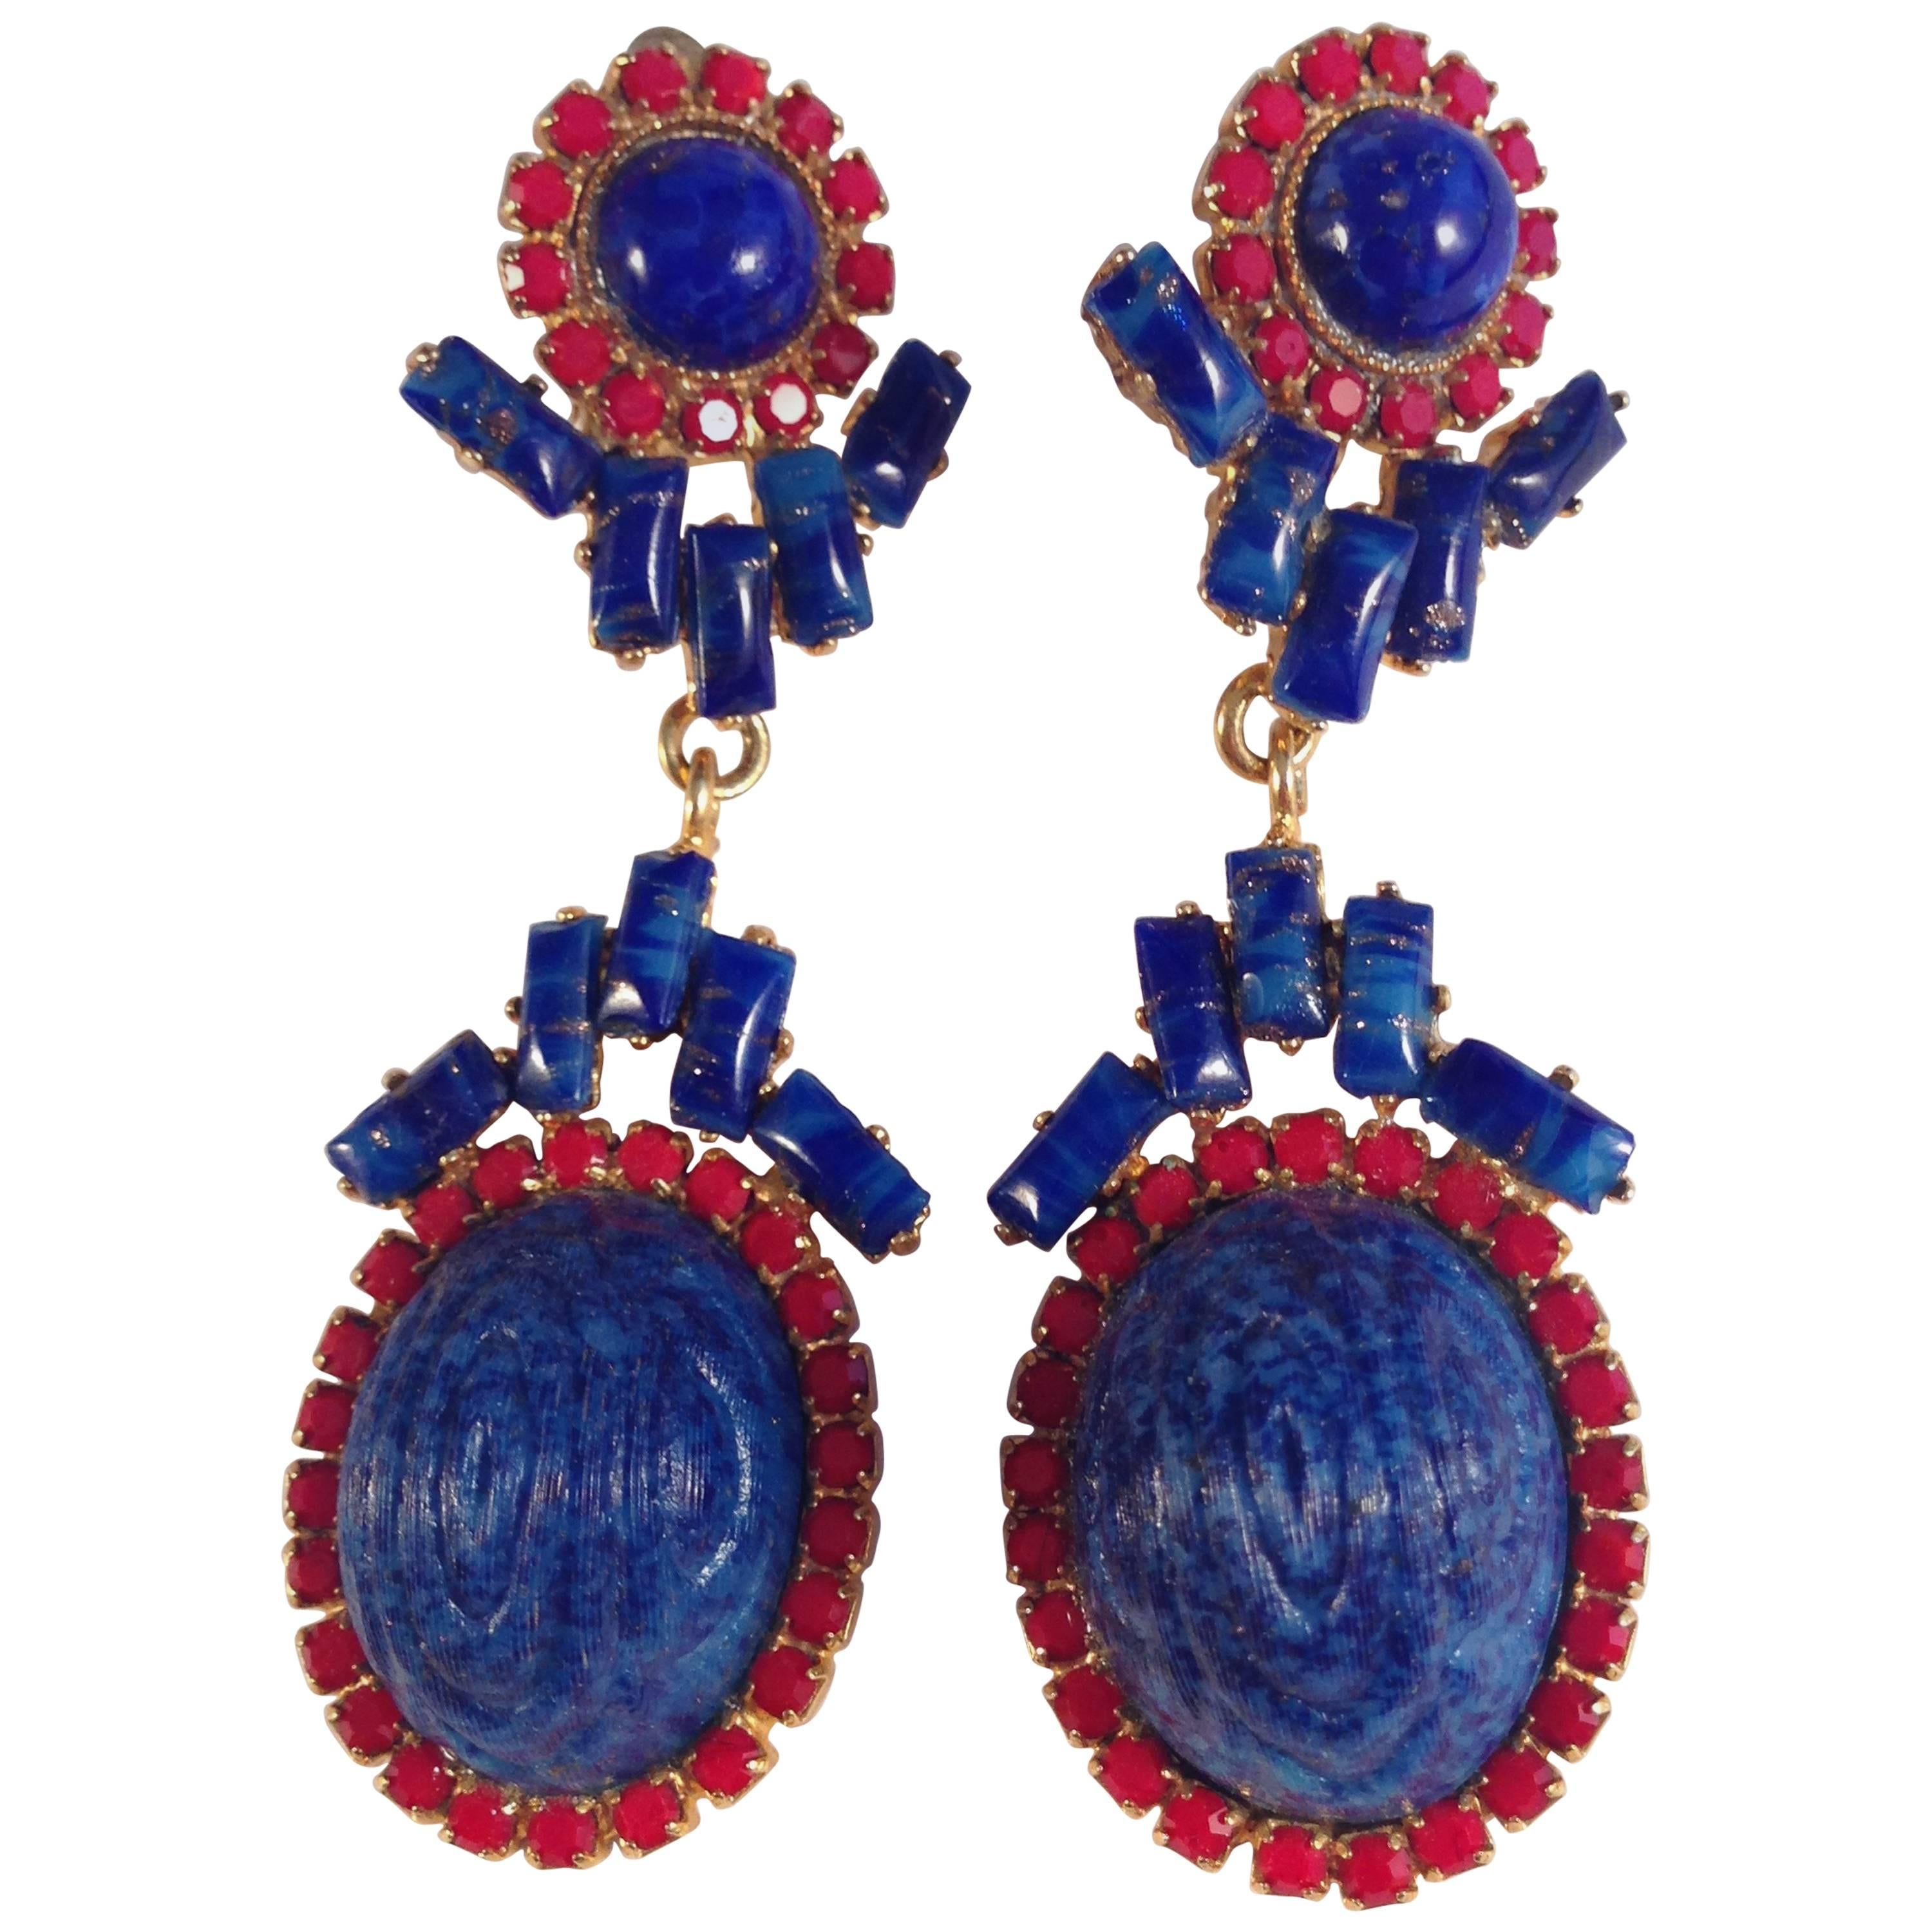 William De Lillo Earrings Blue and Red 1971